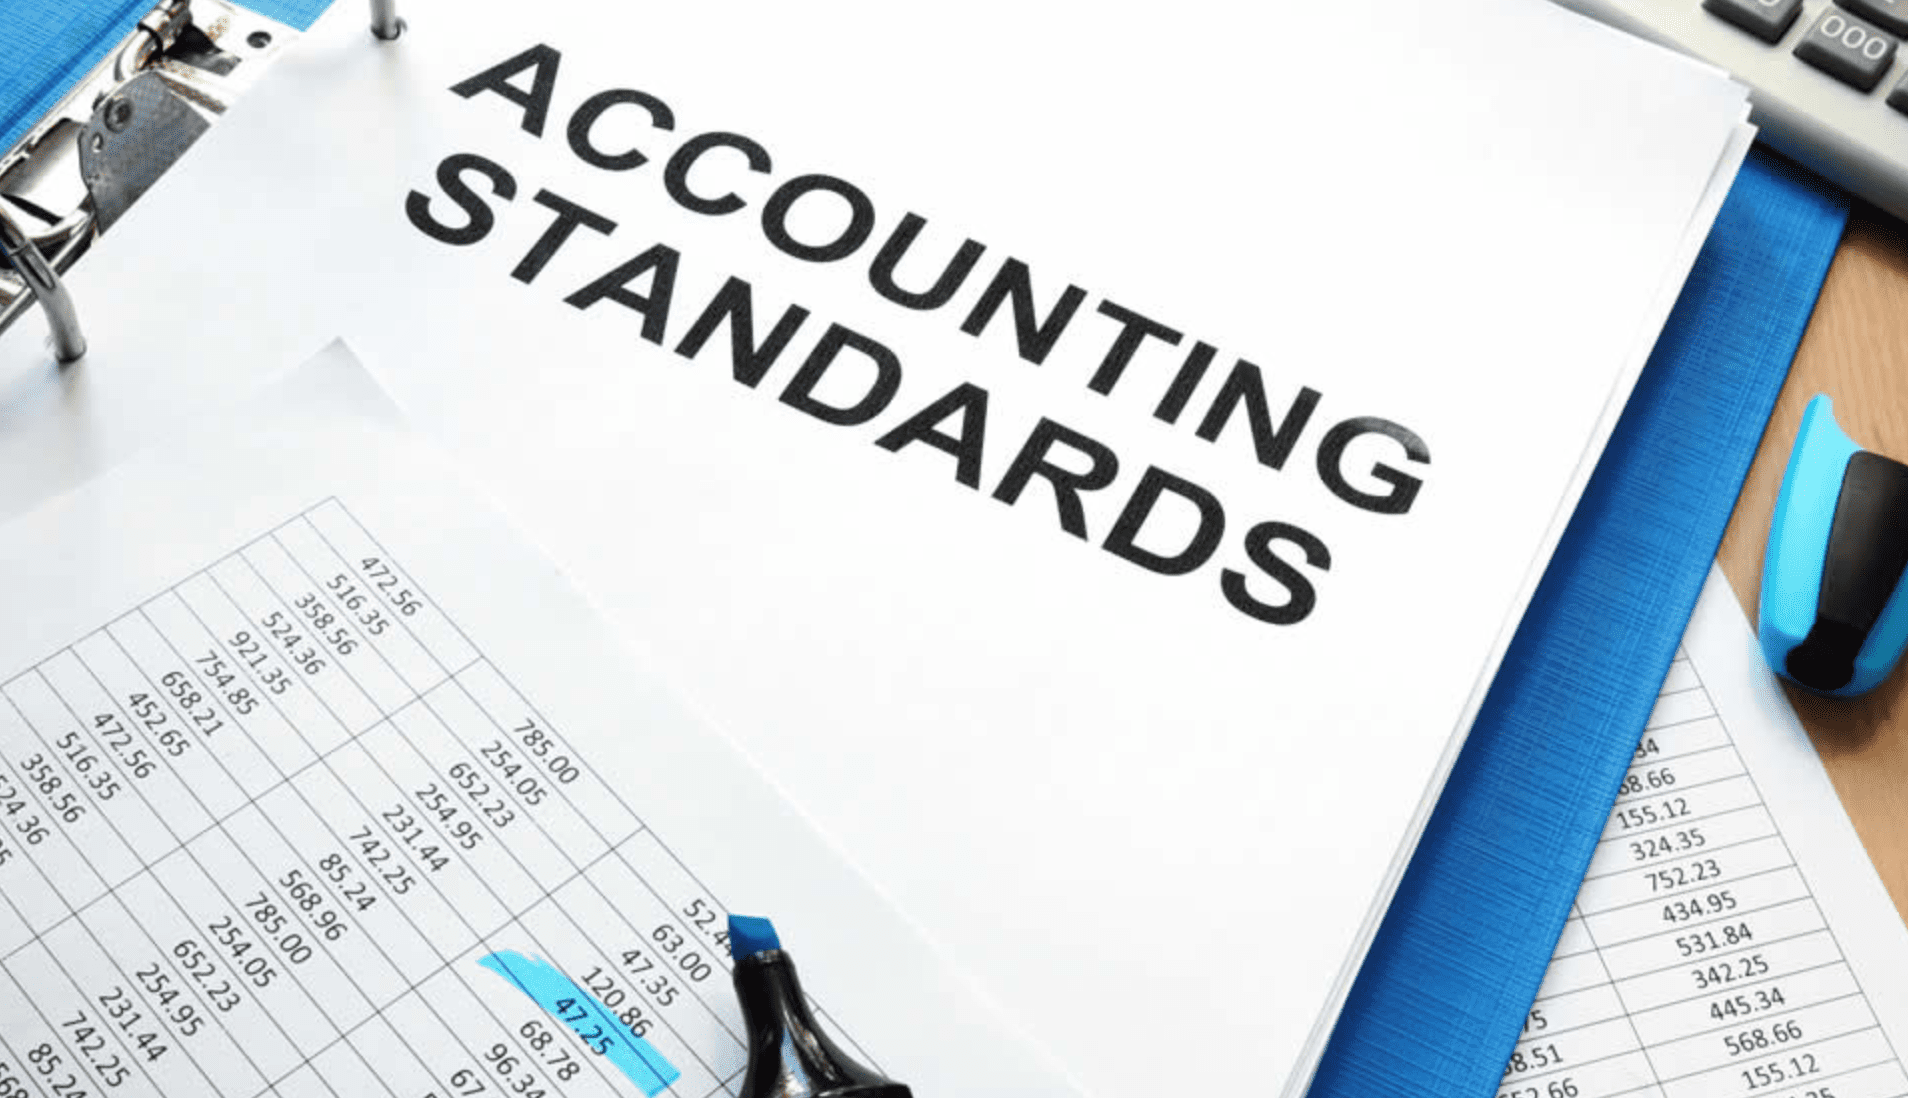 Accounting Standards Update Event, June 1st